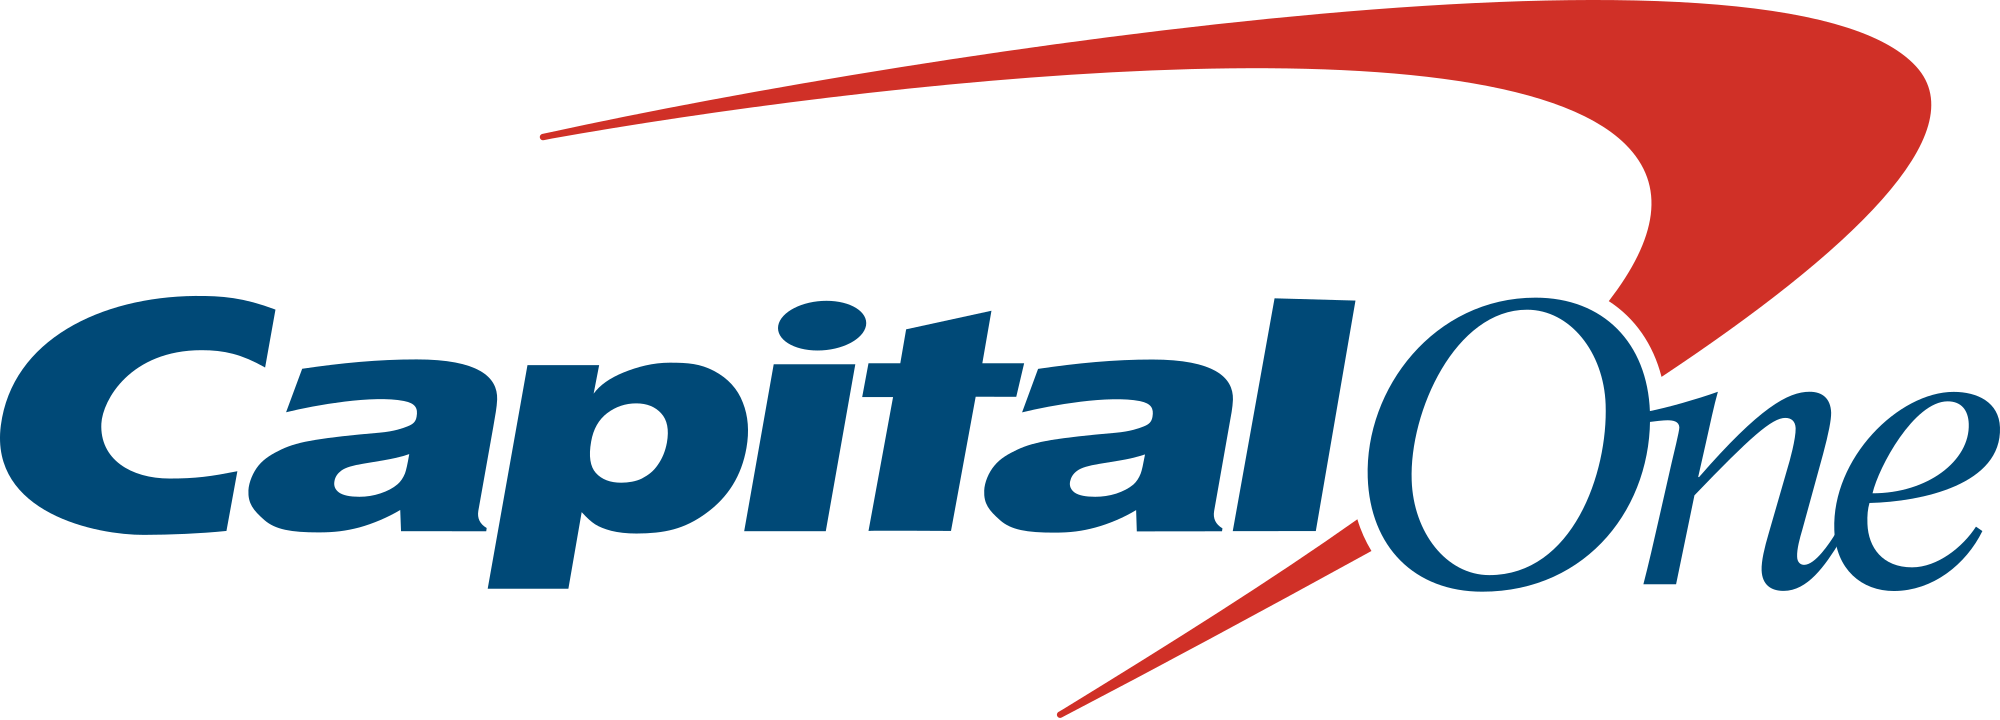 2000px-Capital_One_logo.svg.png